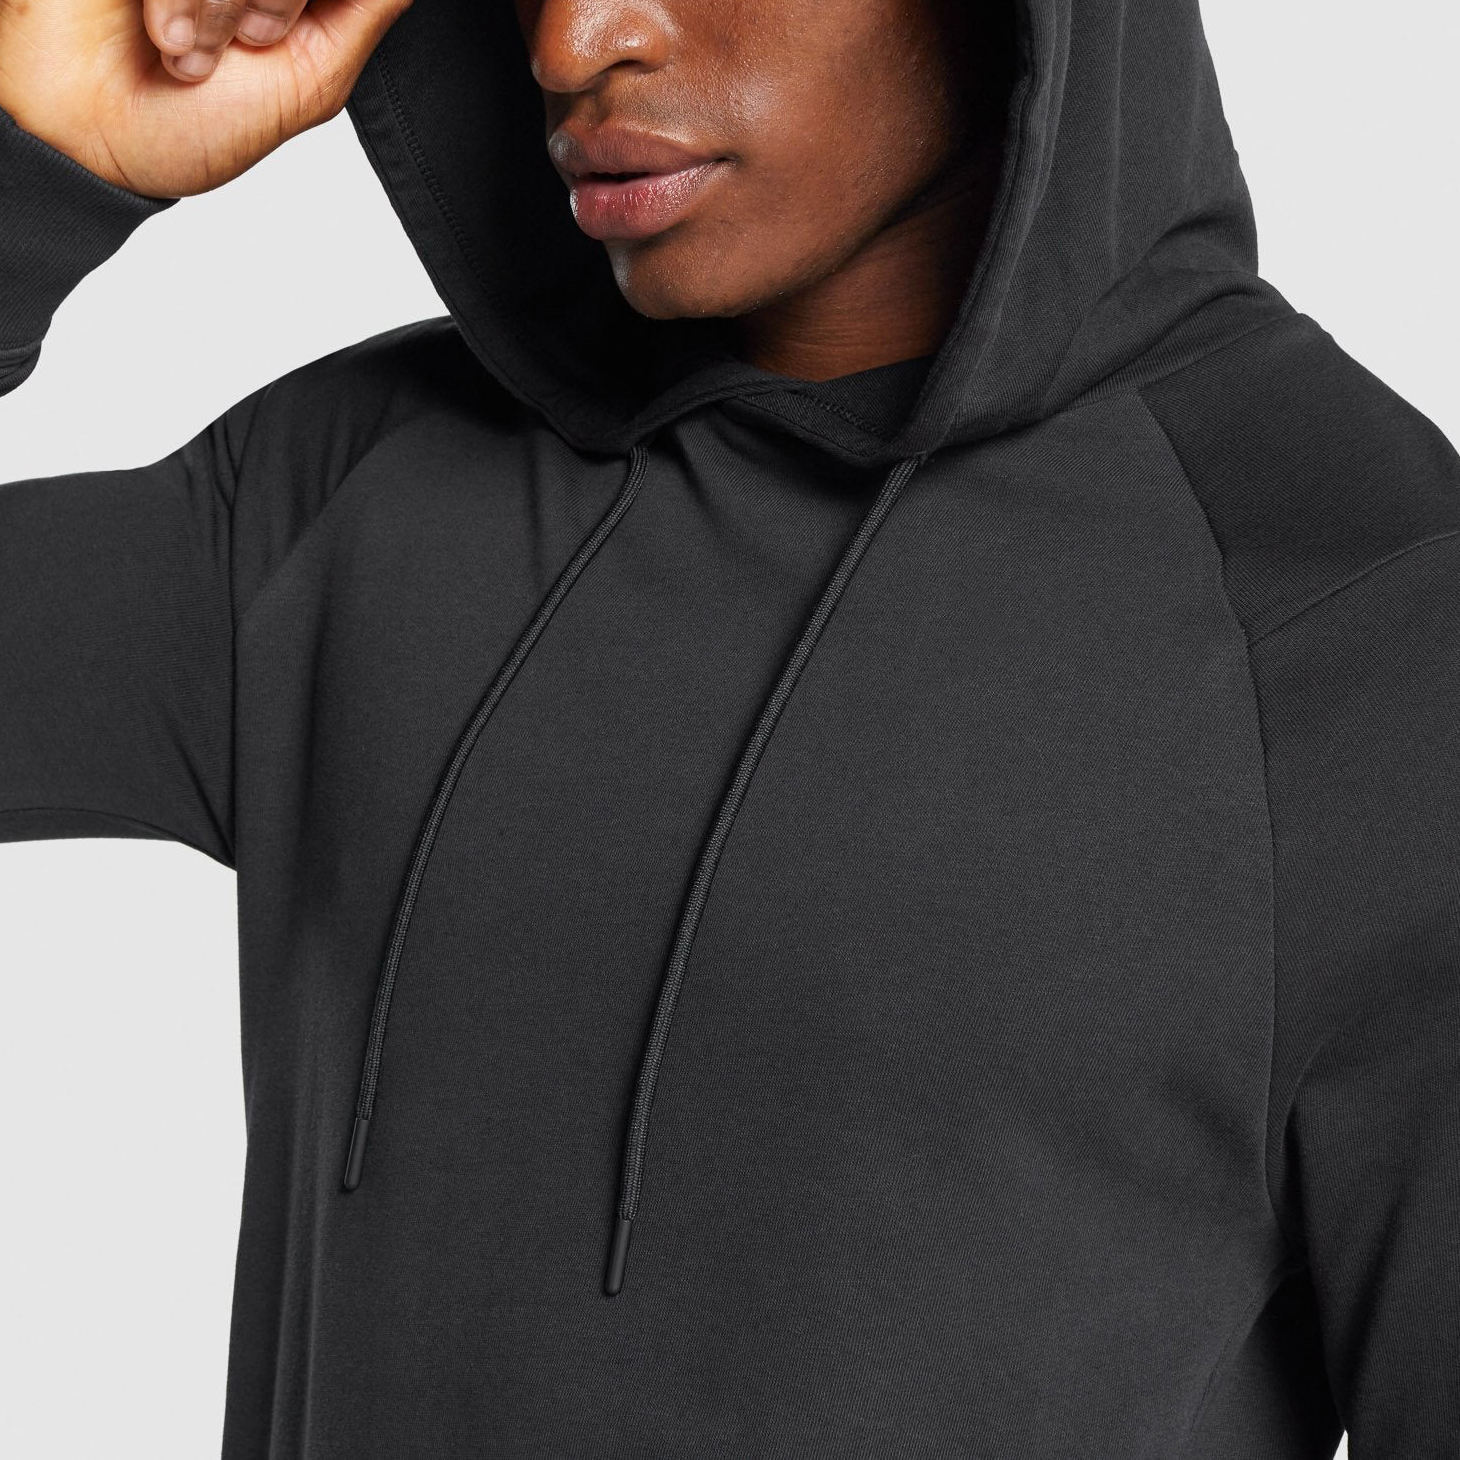 Gym Fitness Hoodies Manufacturer